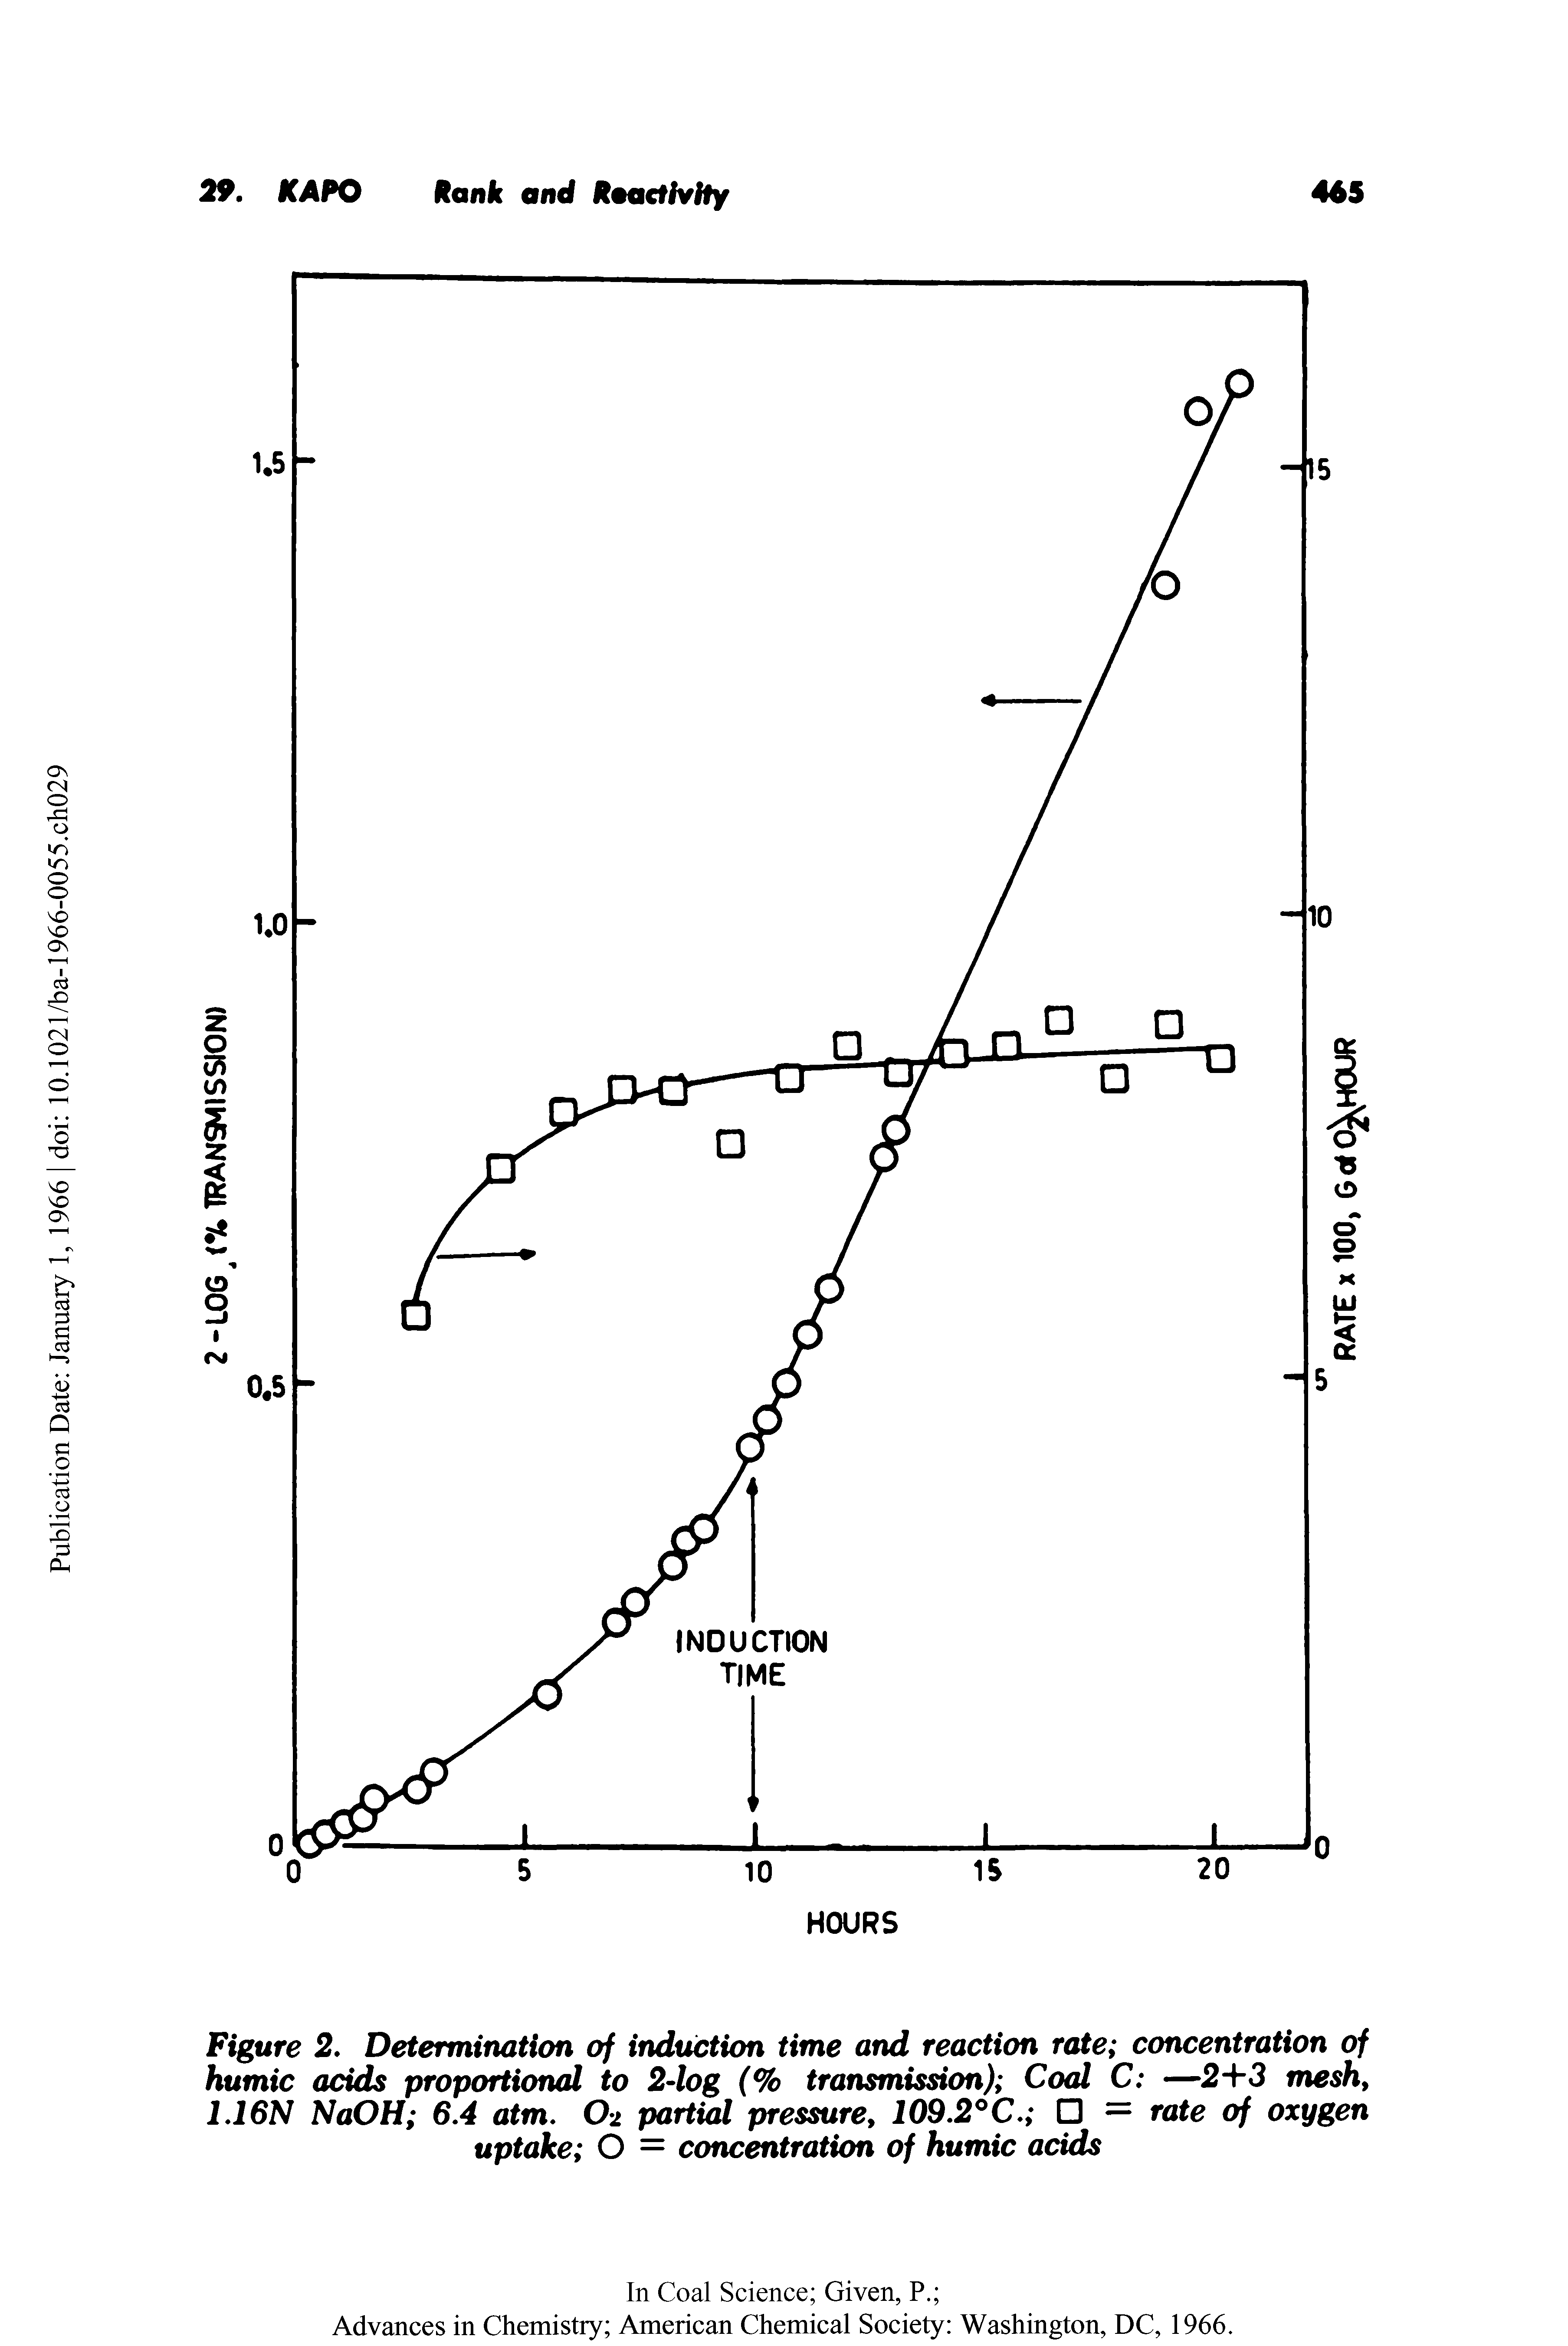 Figure 2. Determination of induction time and reaction rate concentration of humic acids proportional to 2-log (% transmission) Coal C —2-1-3 mesh, 1.16N NaOH 6.4 atm. Oi partial pressure, 109.2°C. = rate of oxygen uptake O = concentration of humic acids...